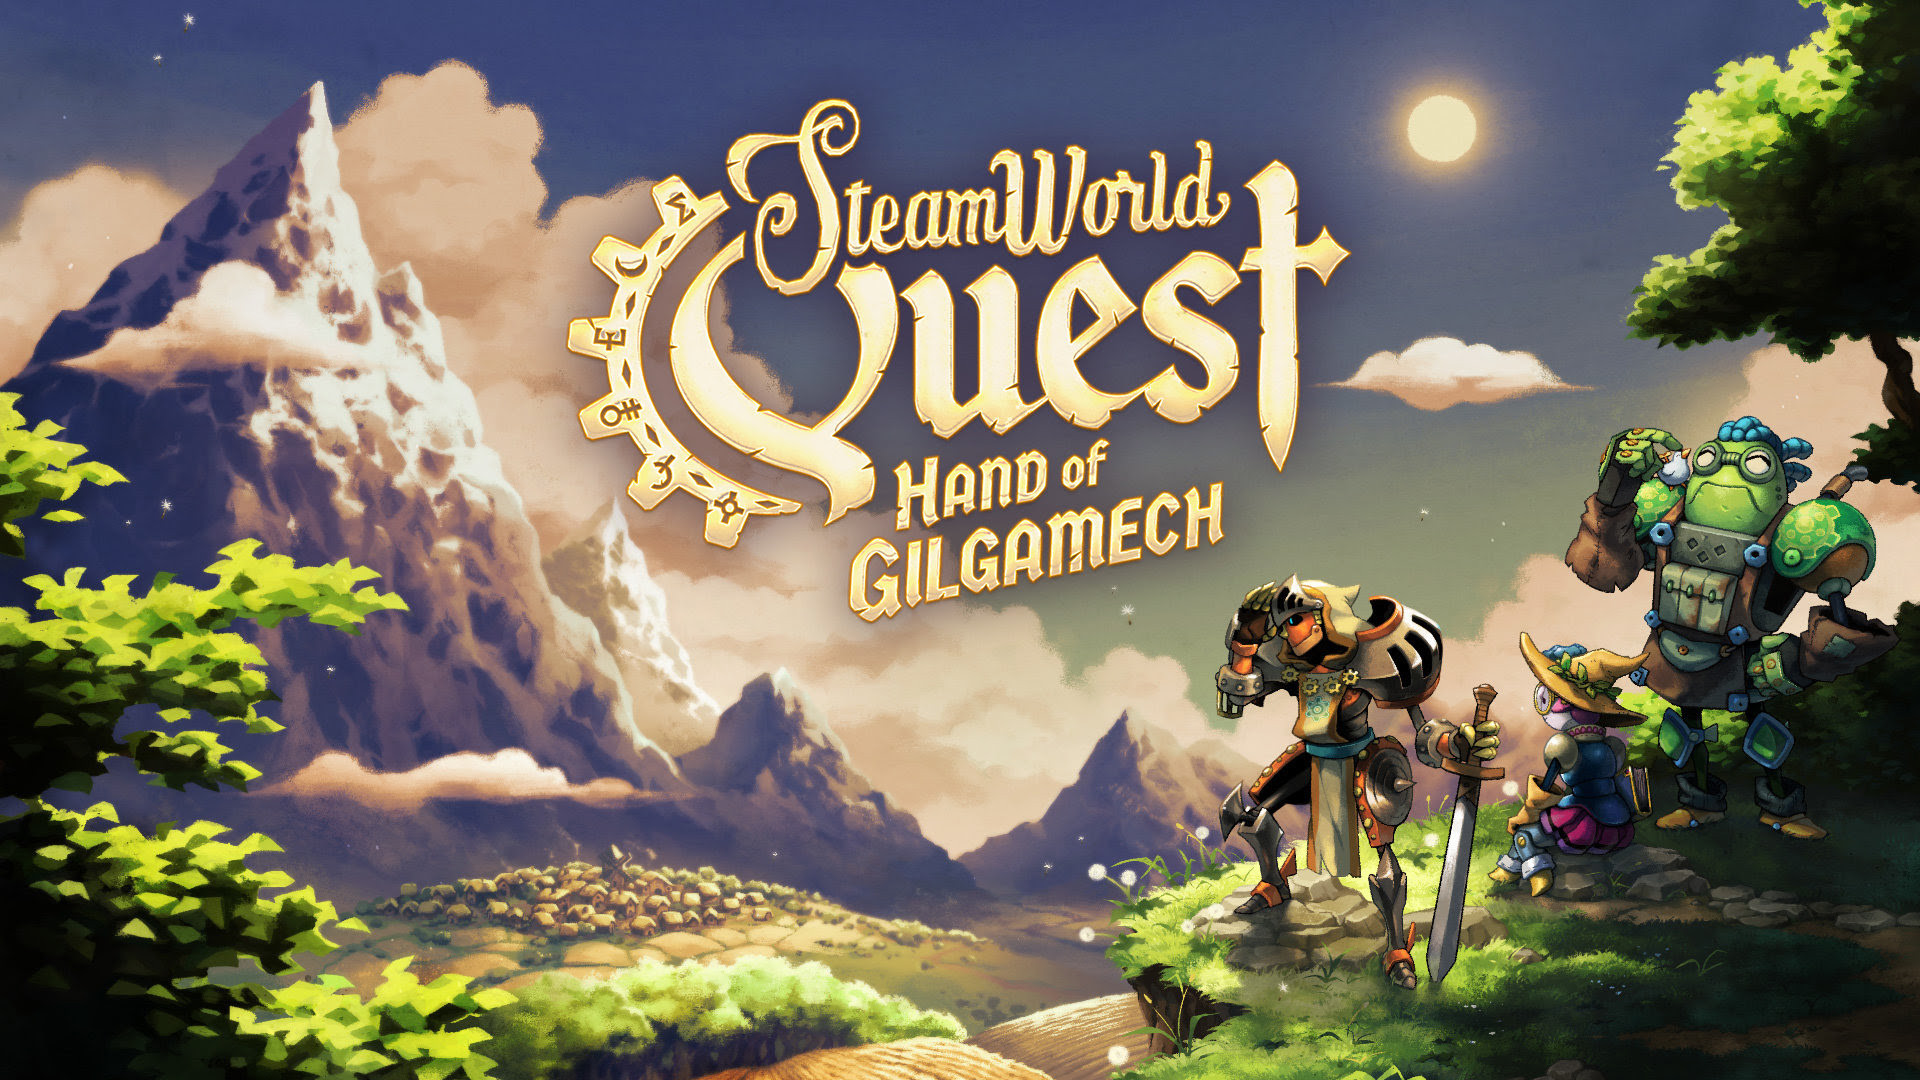 Steamworld Quest Hand Of Gilgamech Is An Rpg Card Game For Switch